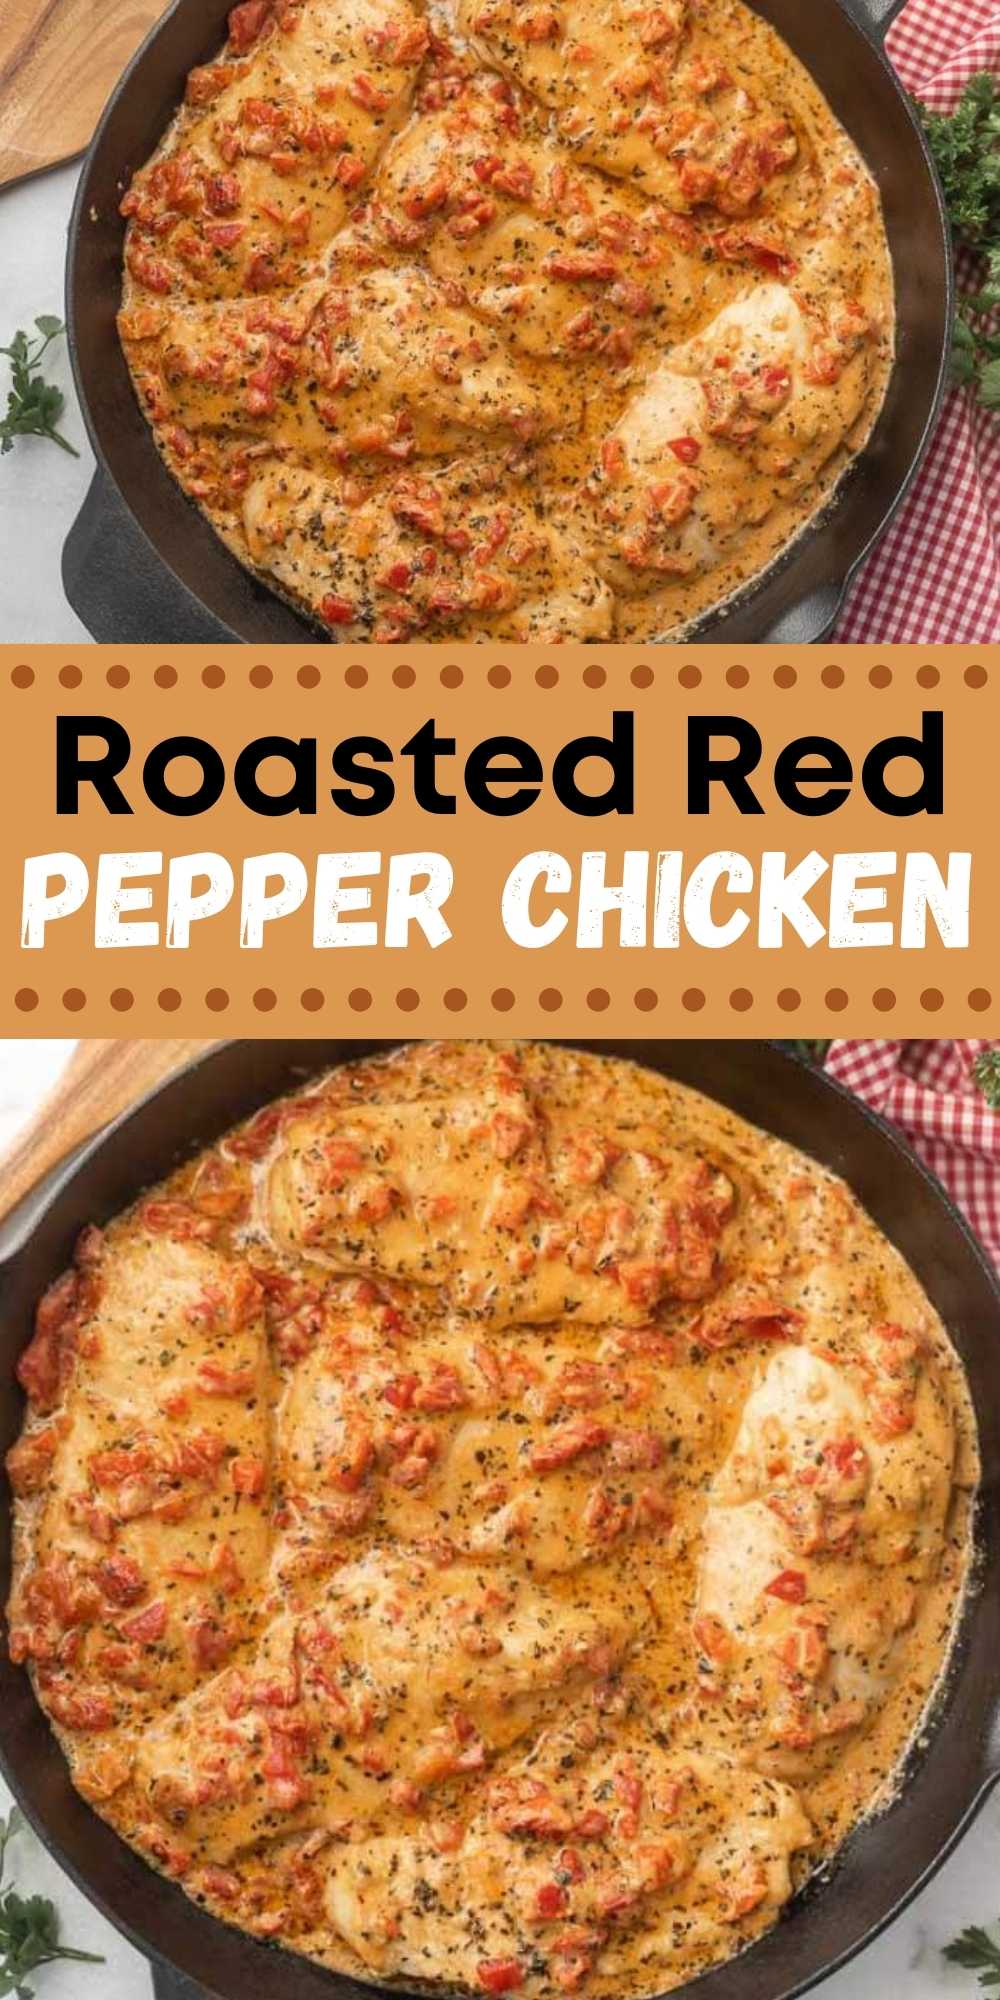 Roasted Red Pepper Chicken Recipe is easy to make with tasty red pepper cream sauce. This skillet meal is the perfect low carb and keto recipe. This roasted red pepper chicken is an easy skillet recipe that the entire family will love.  #eatingonadime #chickenrecipes #skilletrecipes #lowcarbrecipes #ketorecipes 
